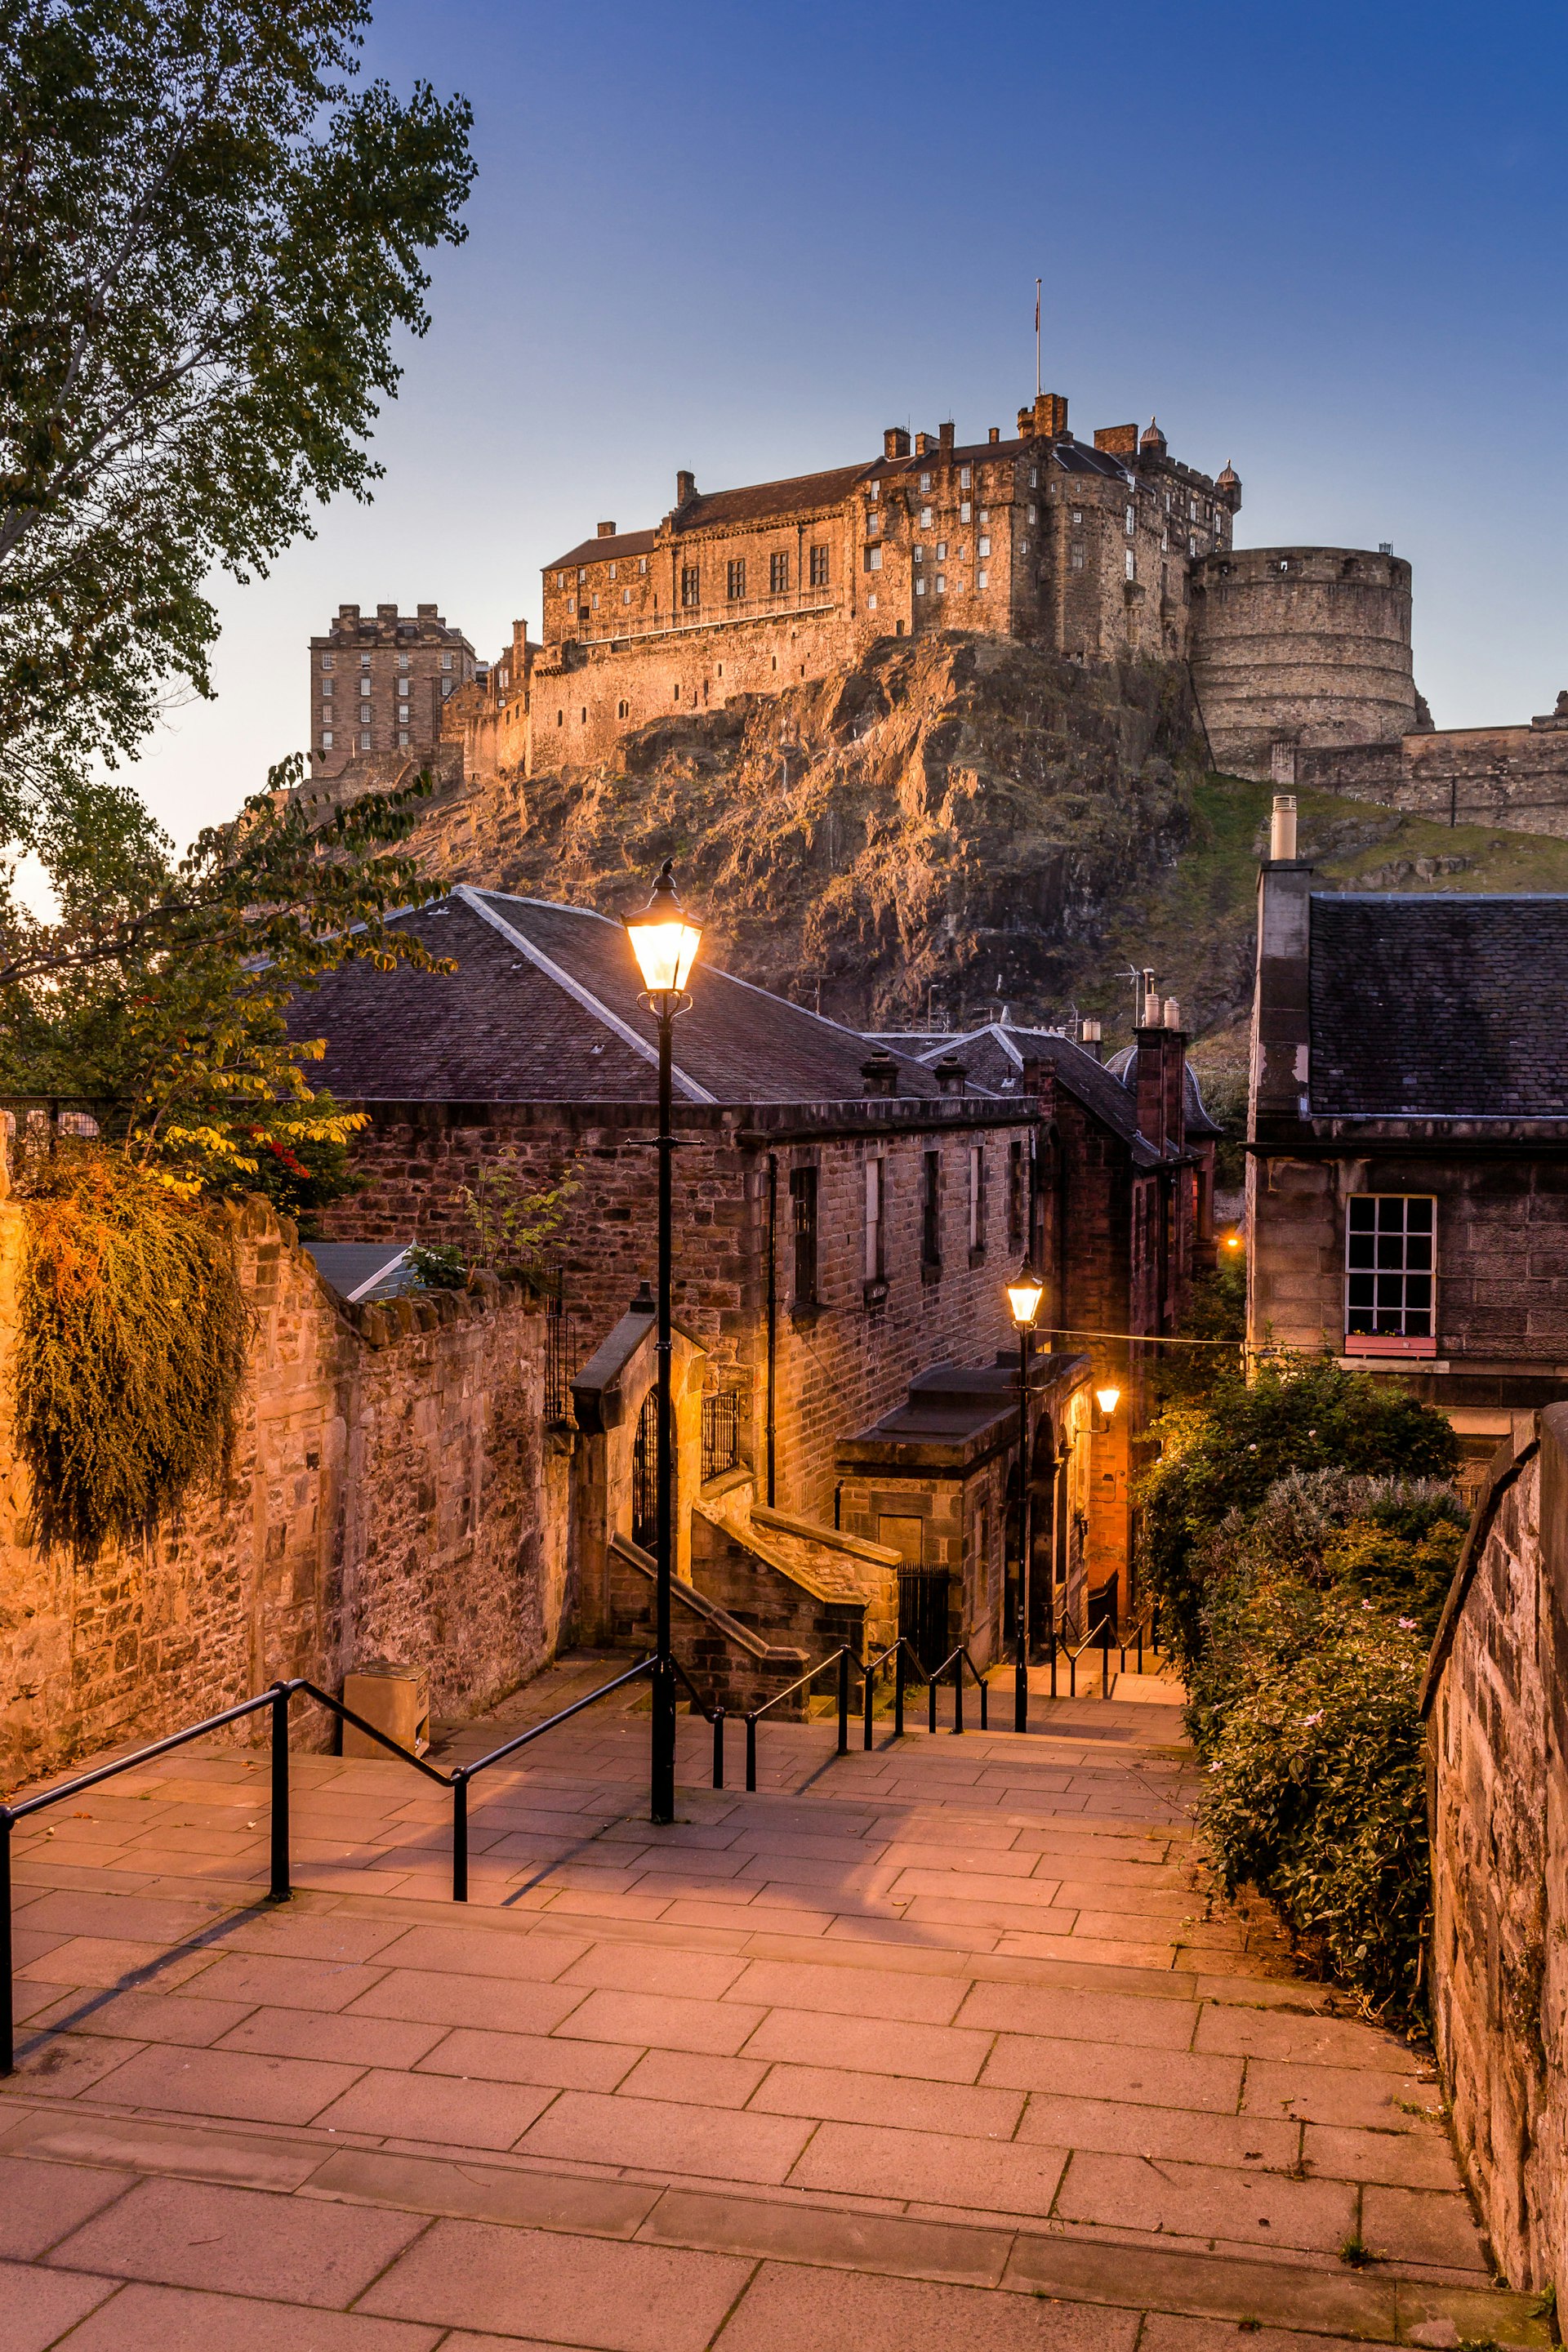 Edinburgh castle from Heriot place